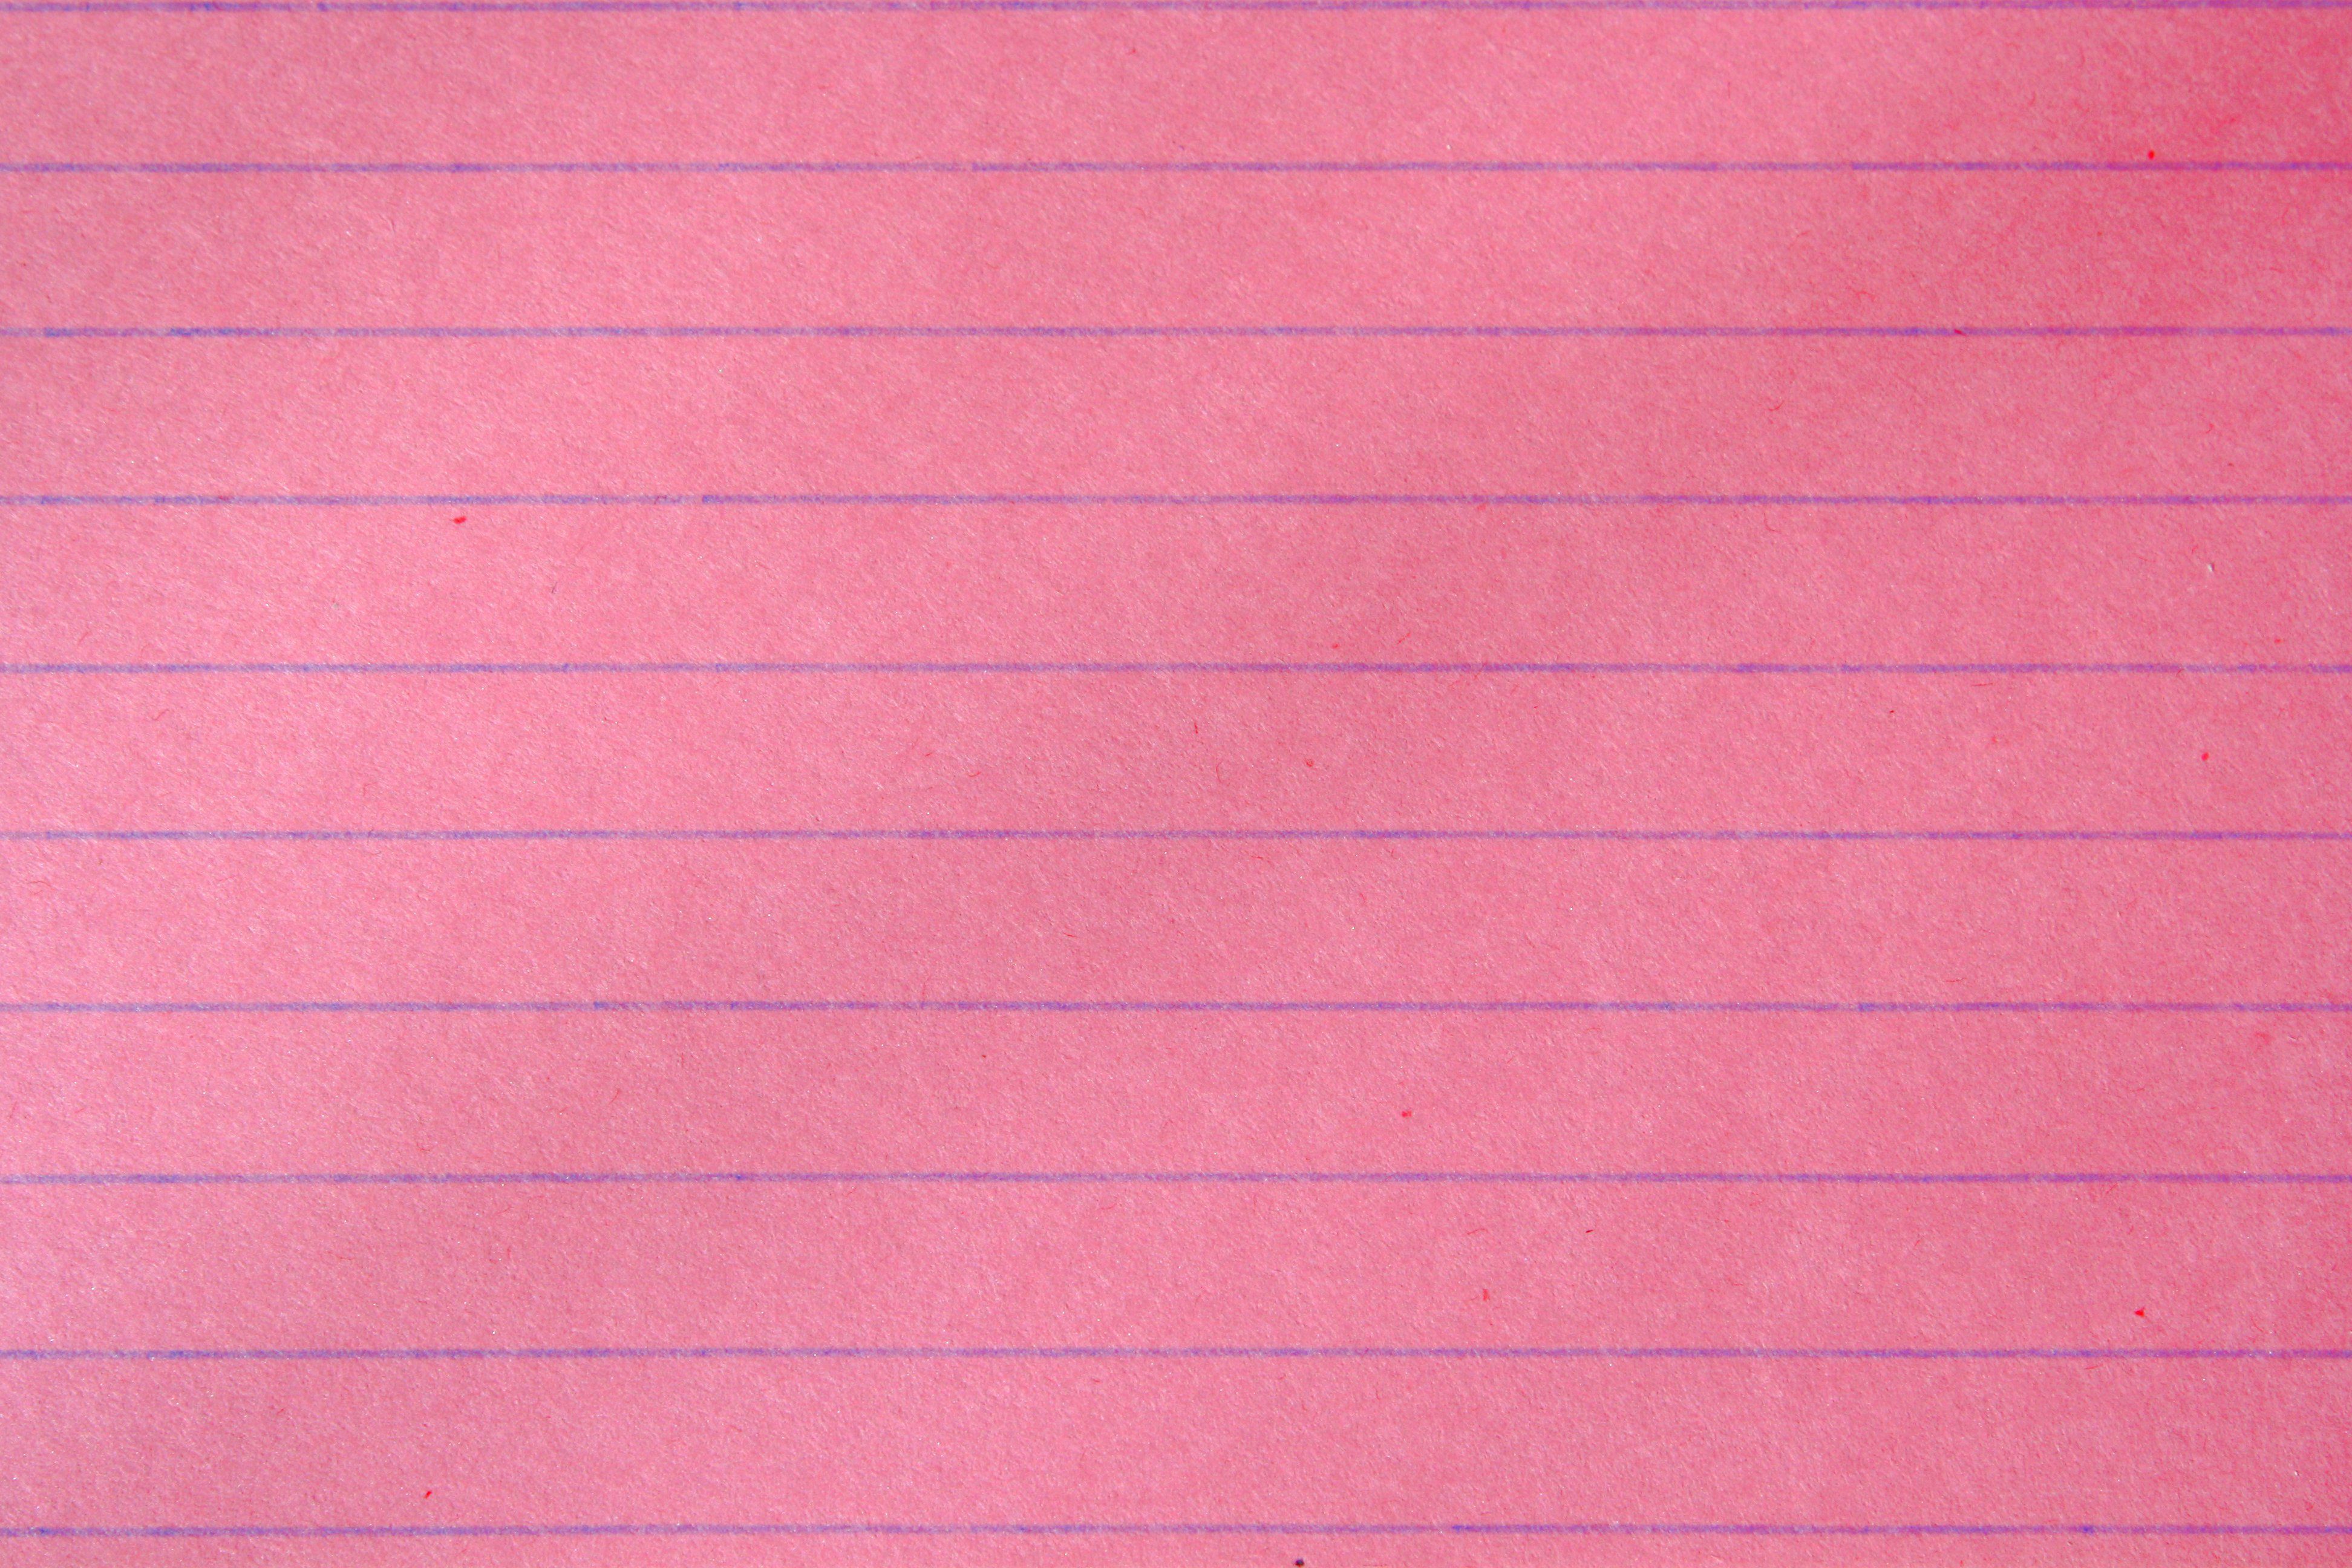 Pink Notebook Paper Texture Picture | Free Photograph | Photos ...